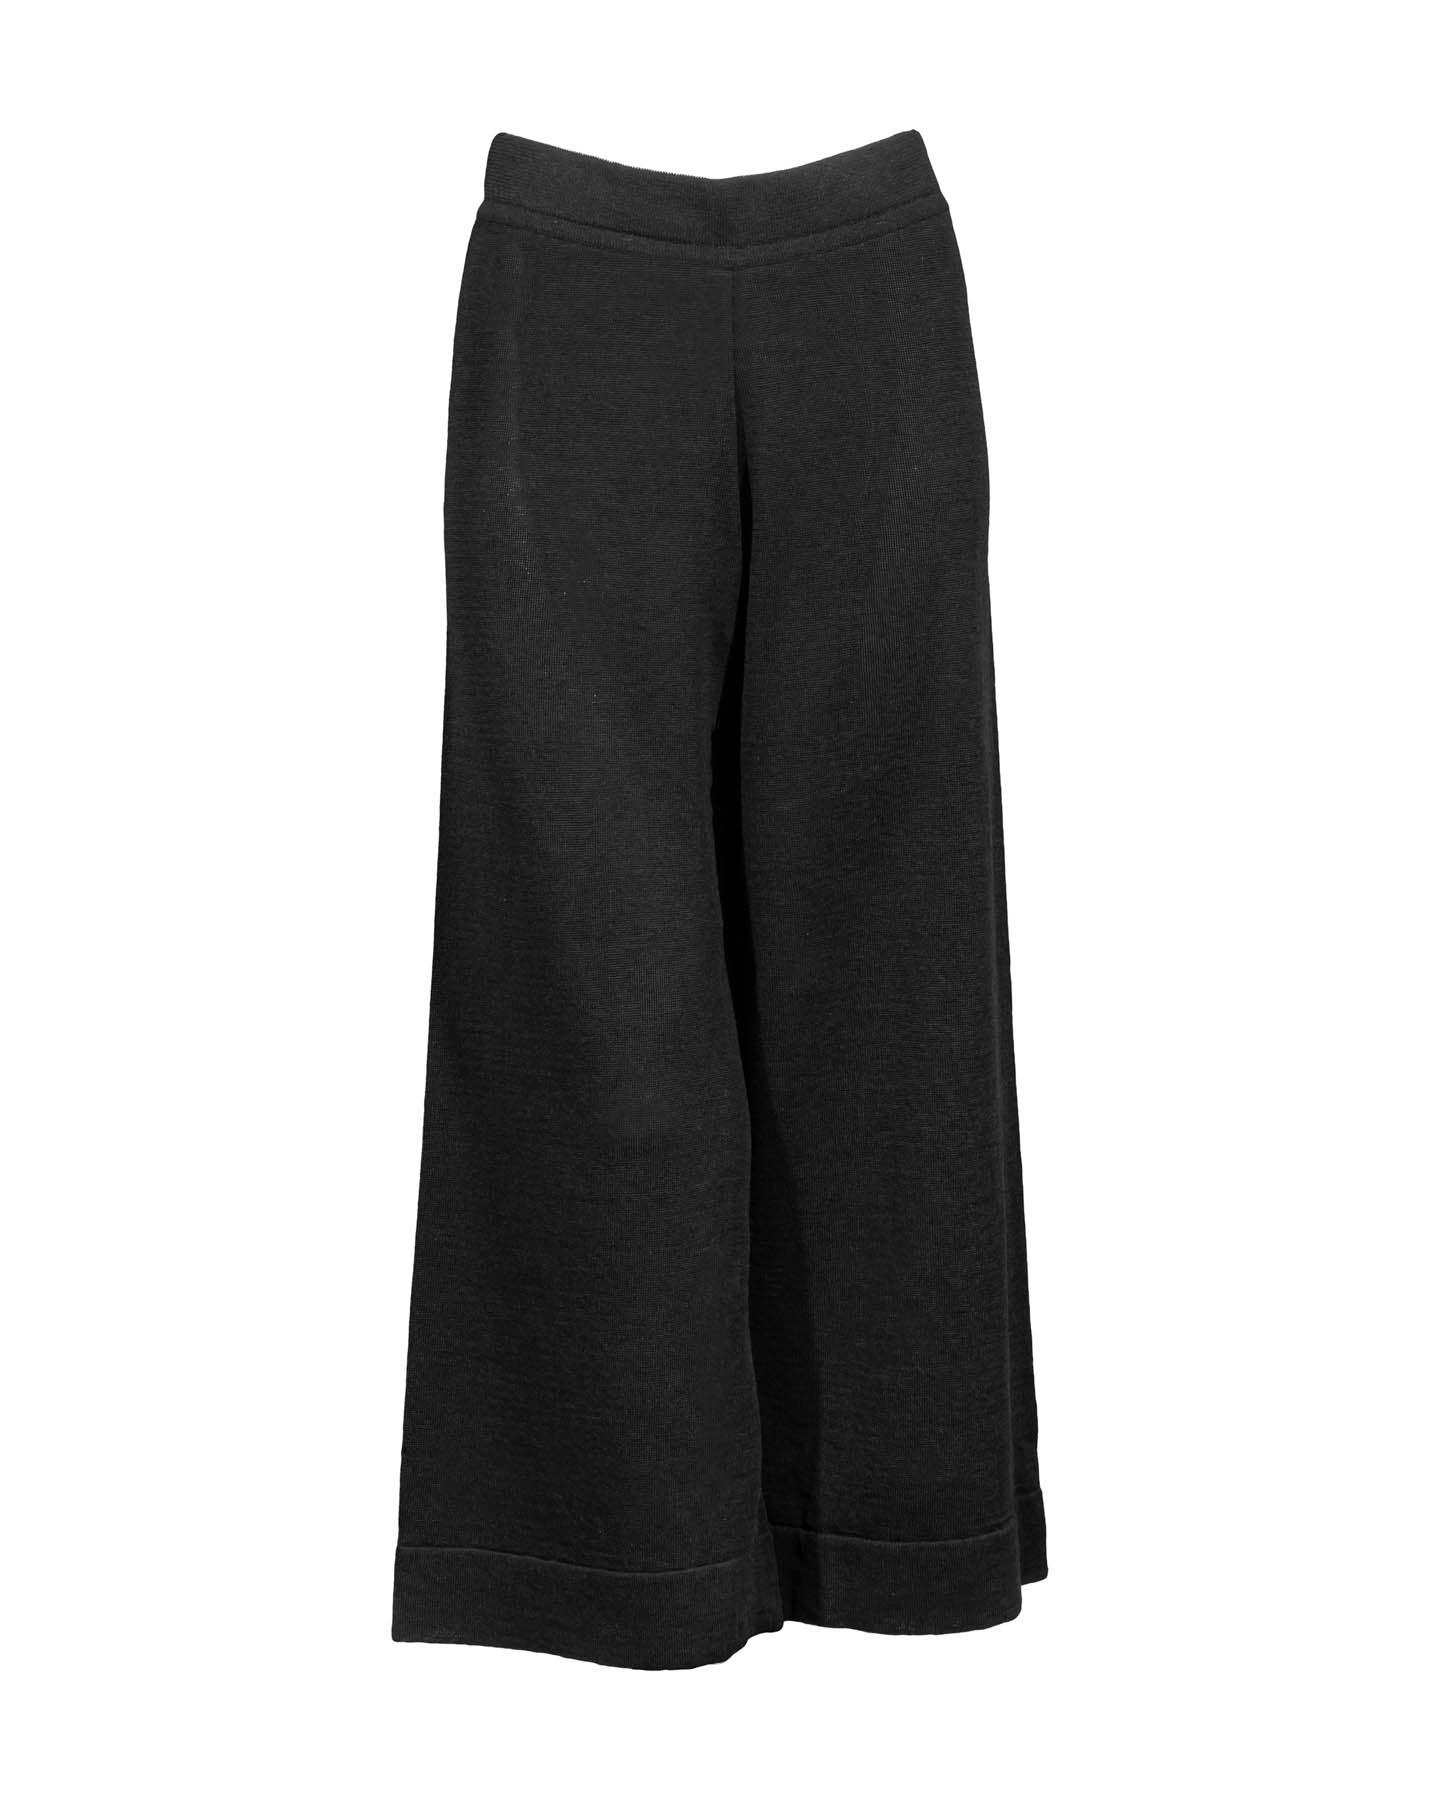 Buy Black Cropped Pant Cotton for Best Price, Reviews, Free Shipping